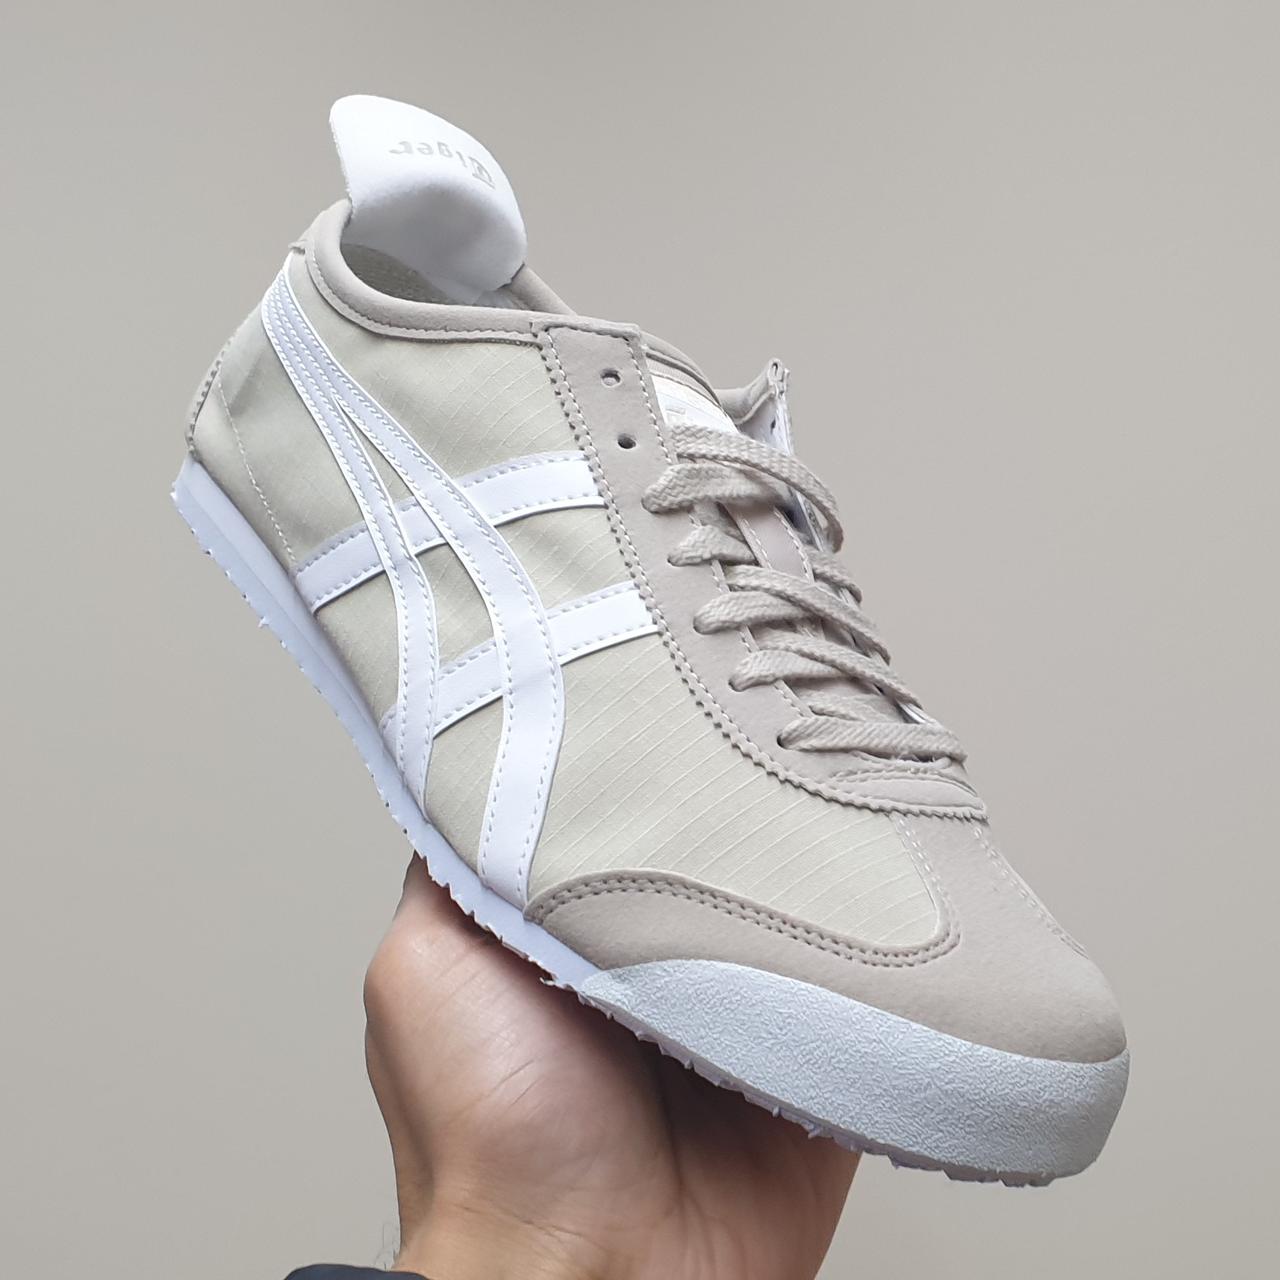 Onitsuka Tiger Mexico 66 Men's Trainers Simply... - Depop